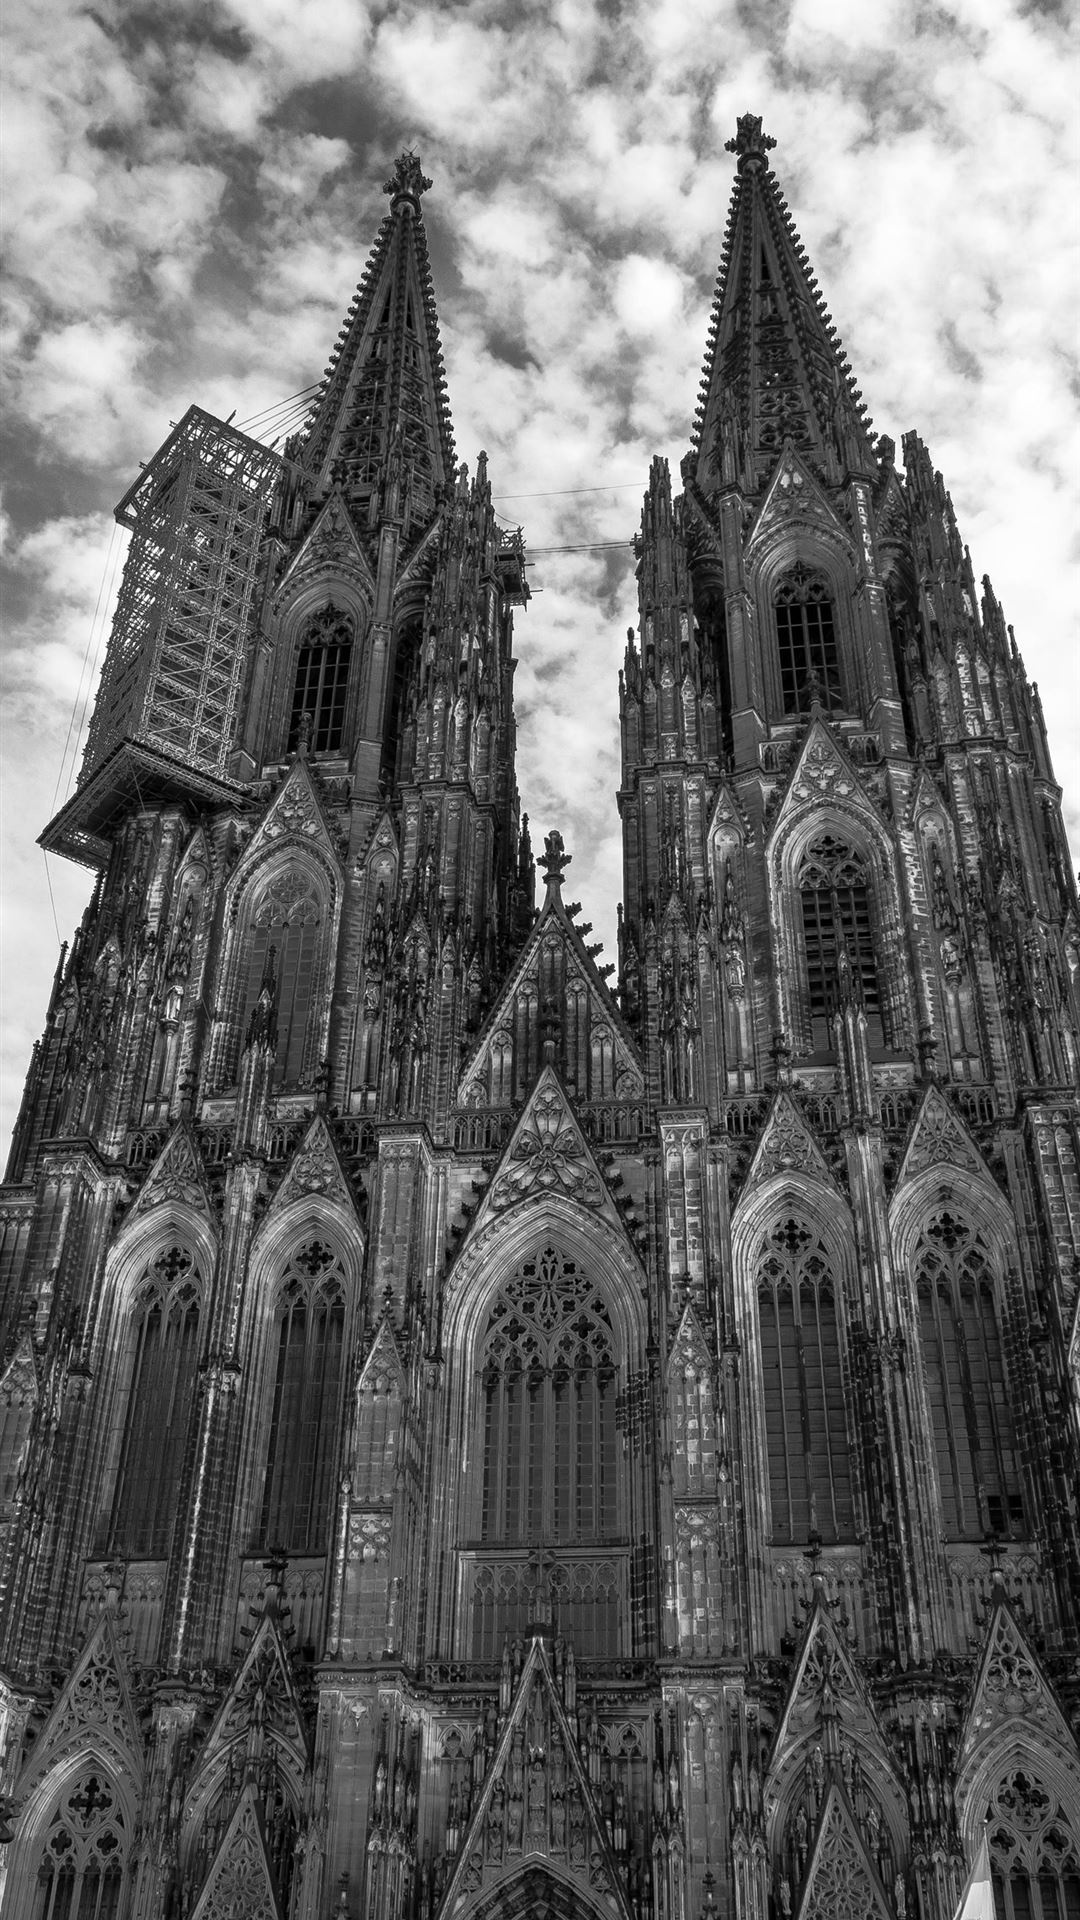 Cologne iPhone wallpapers, Stunning designs, High-resolution images, Free download, 1080x1920 Full HD Phone